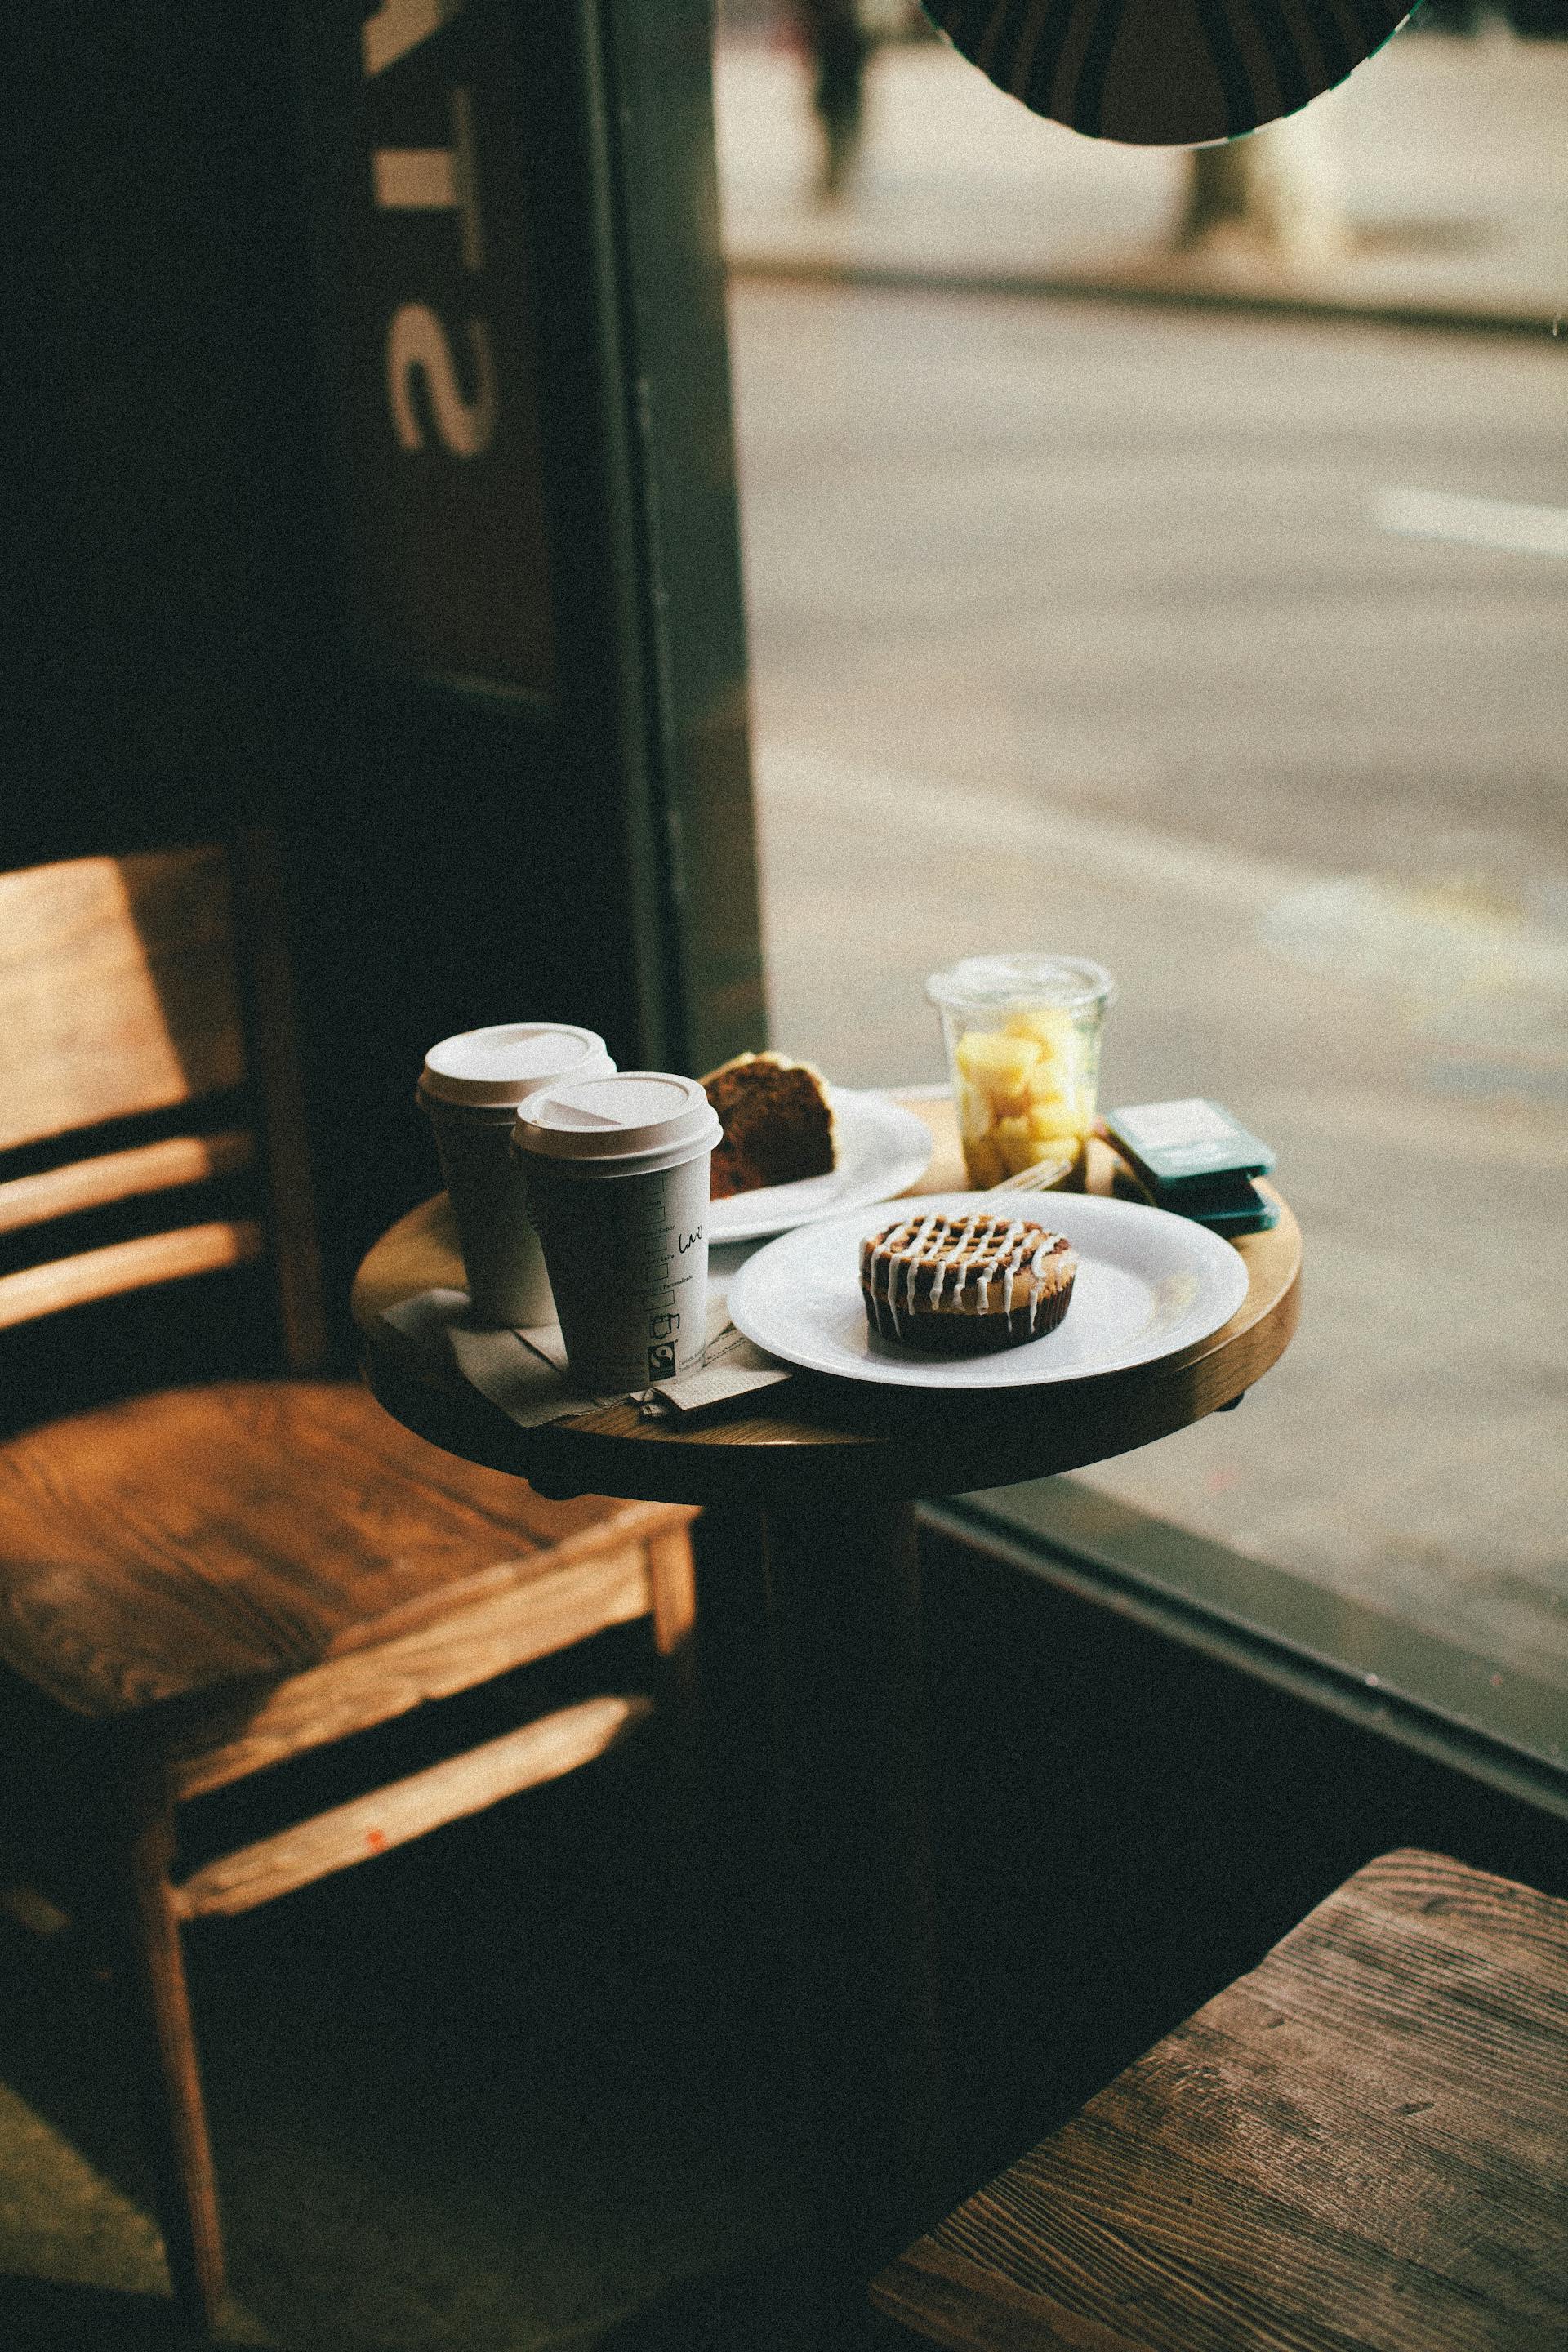 A table at a coffee shop | Source: Pexels